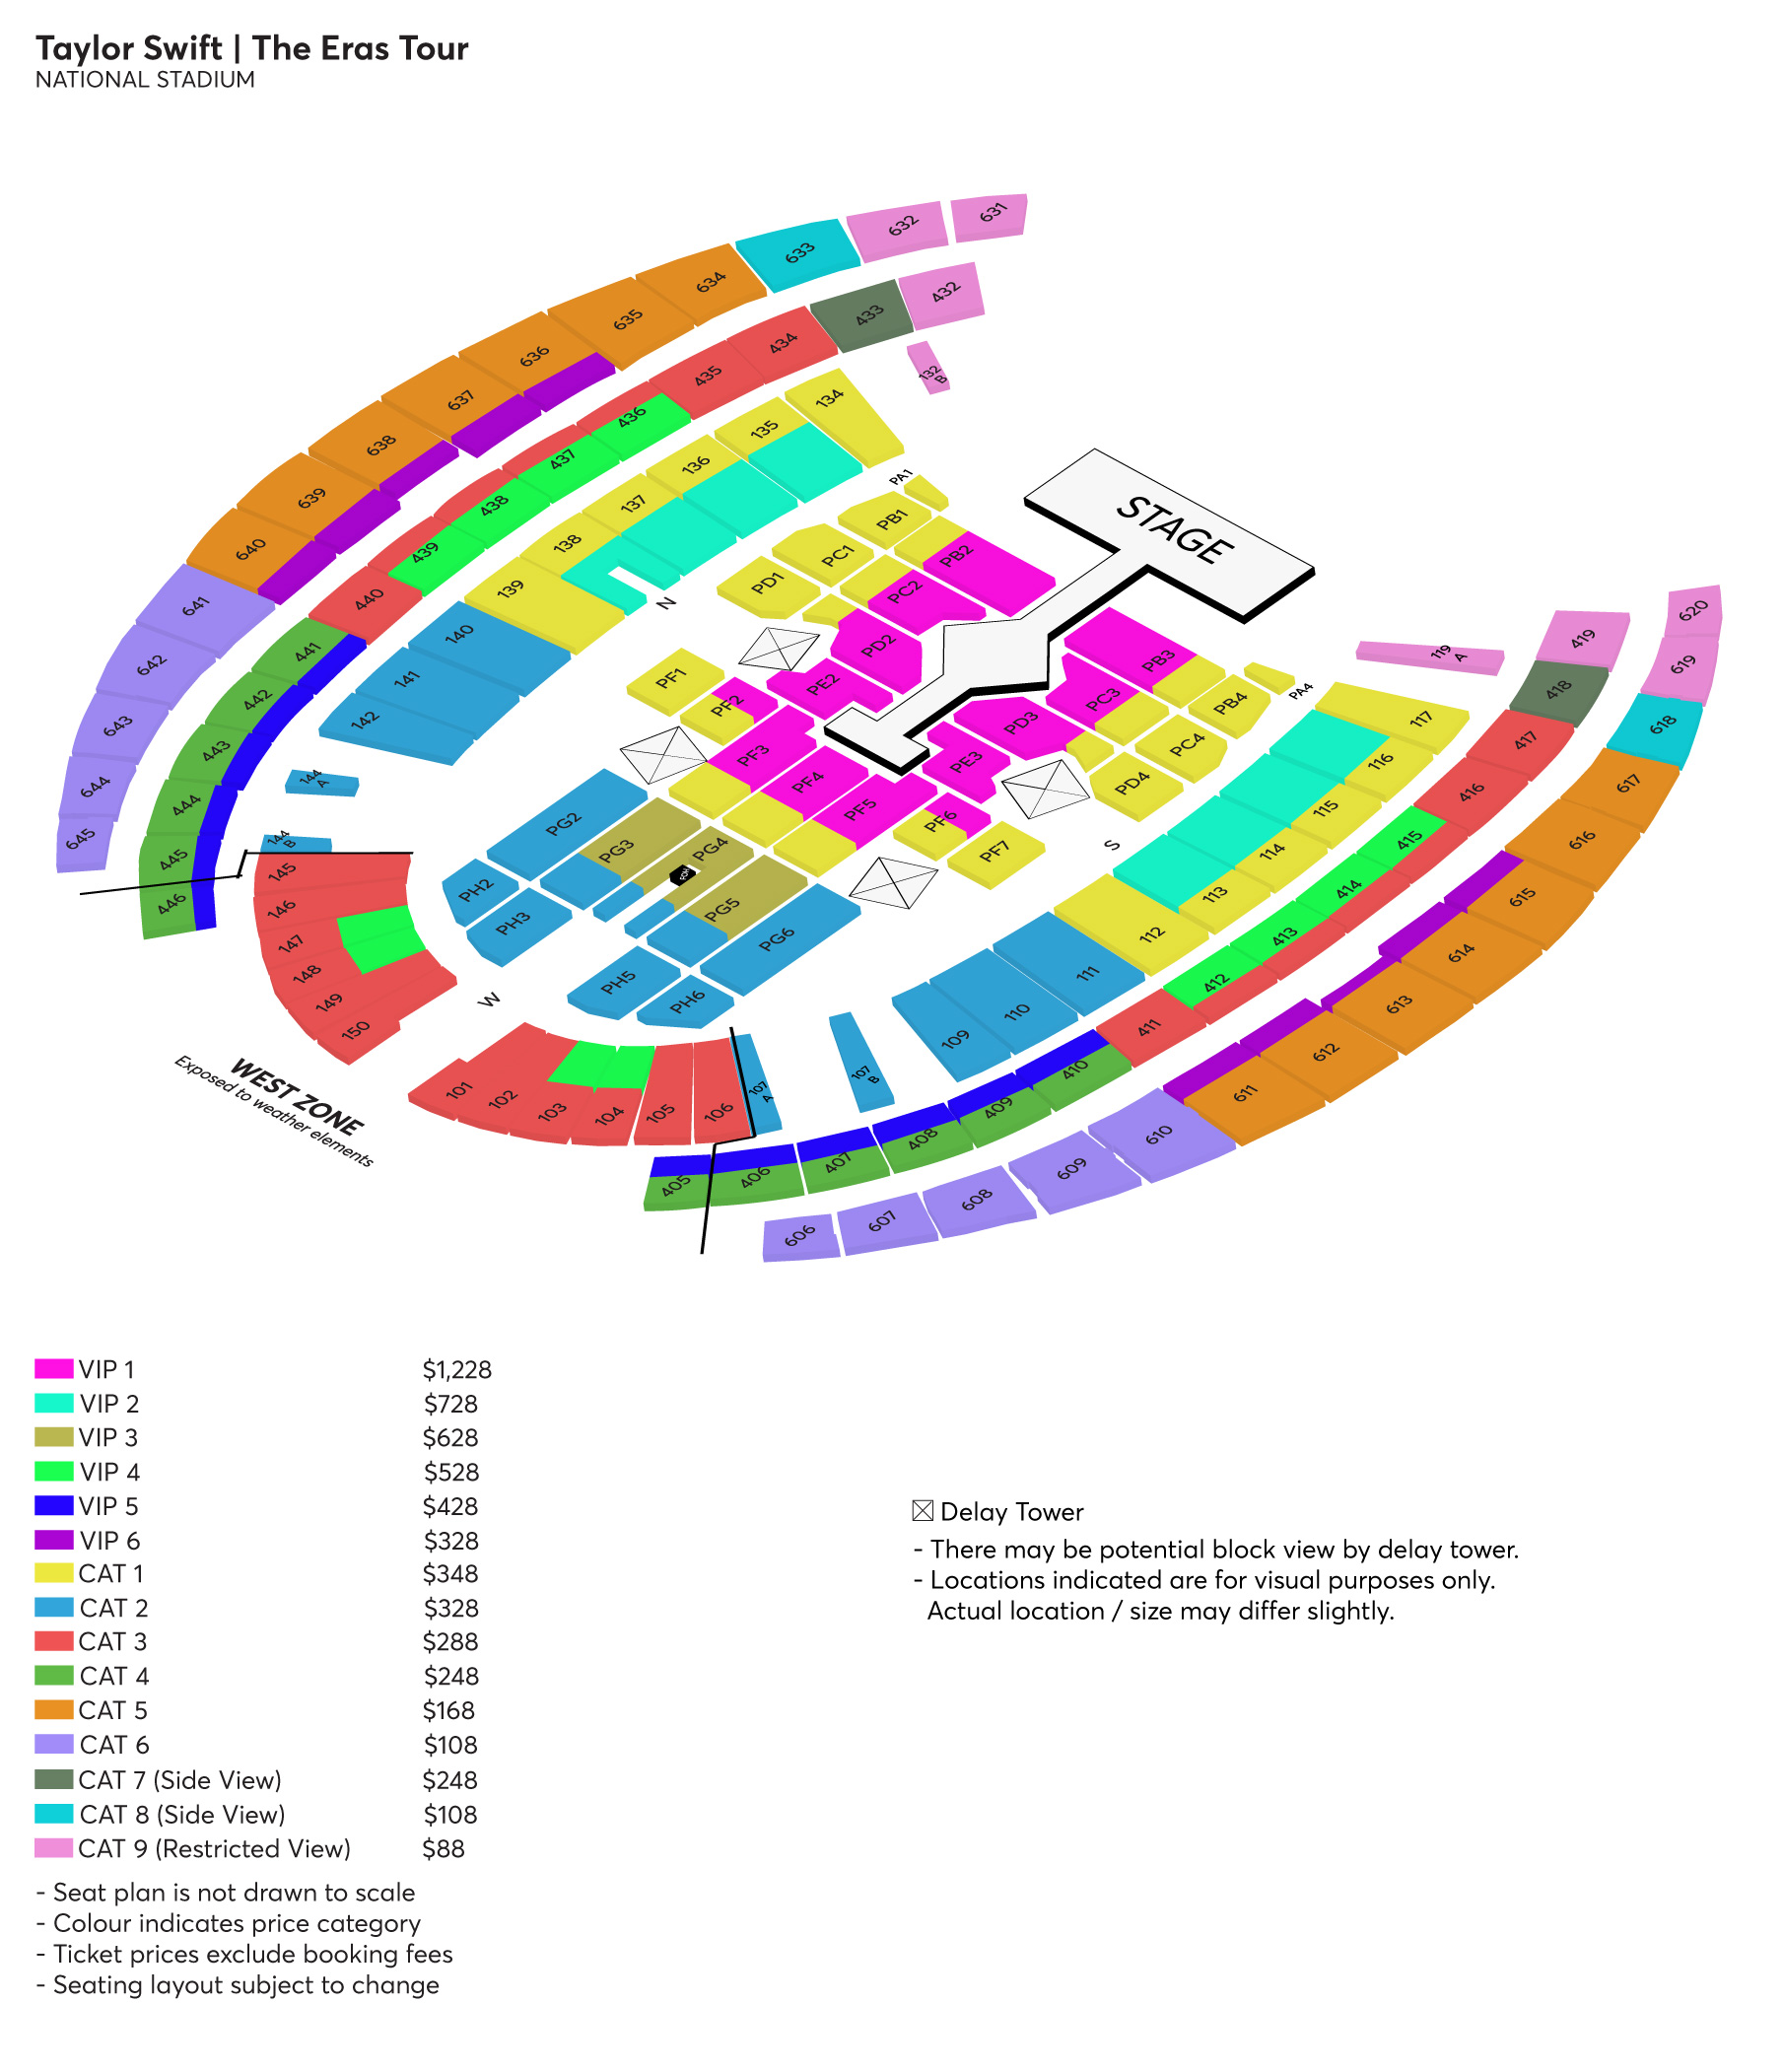 New Cat 12 ticket category added to Taylor Swift S'pore concerts ...